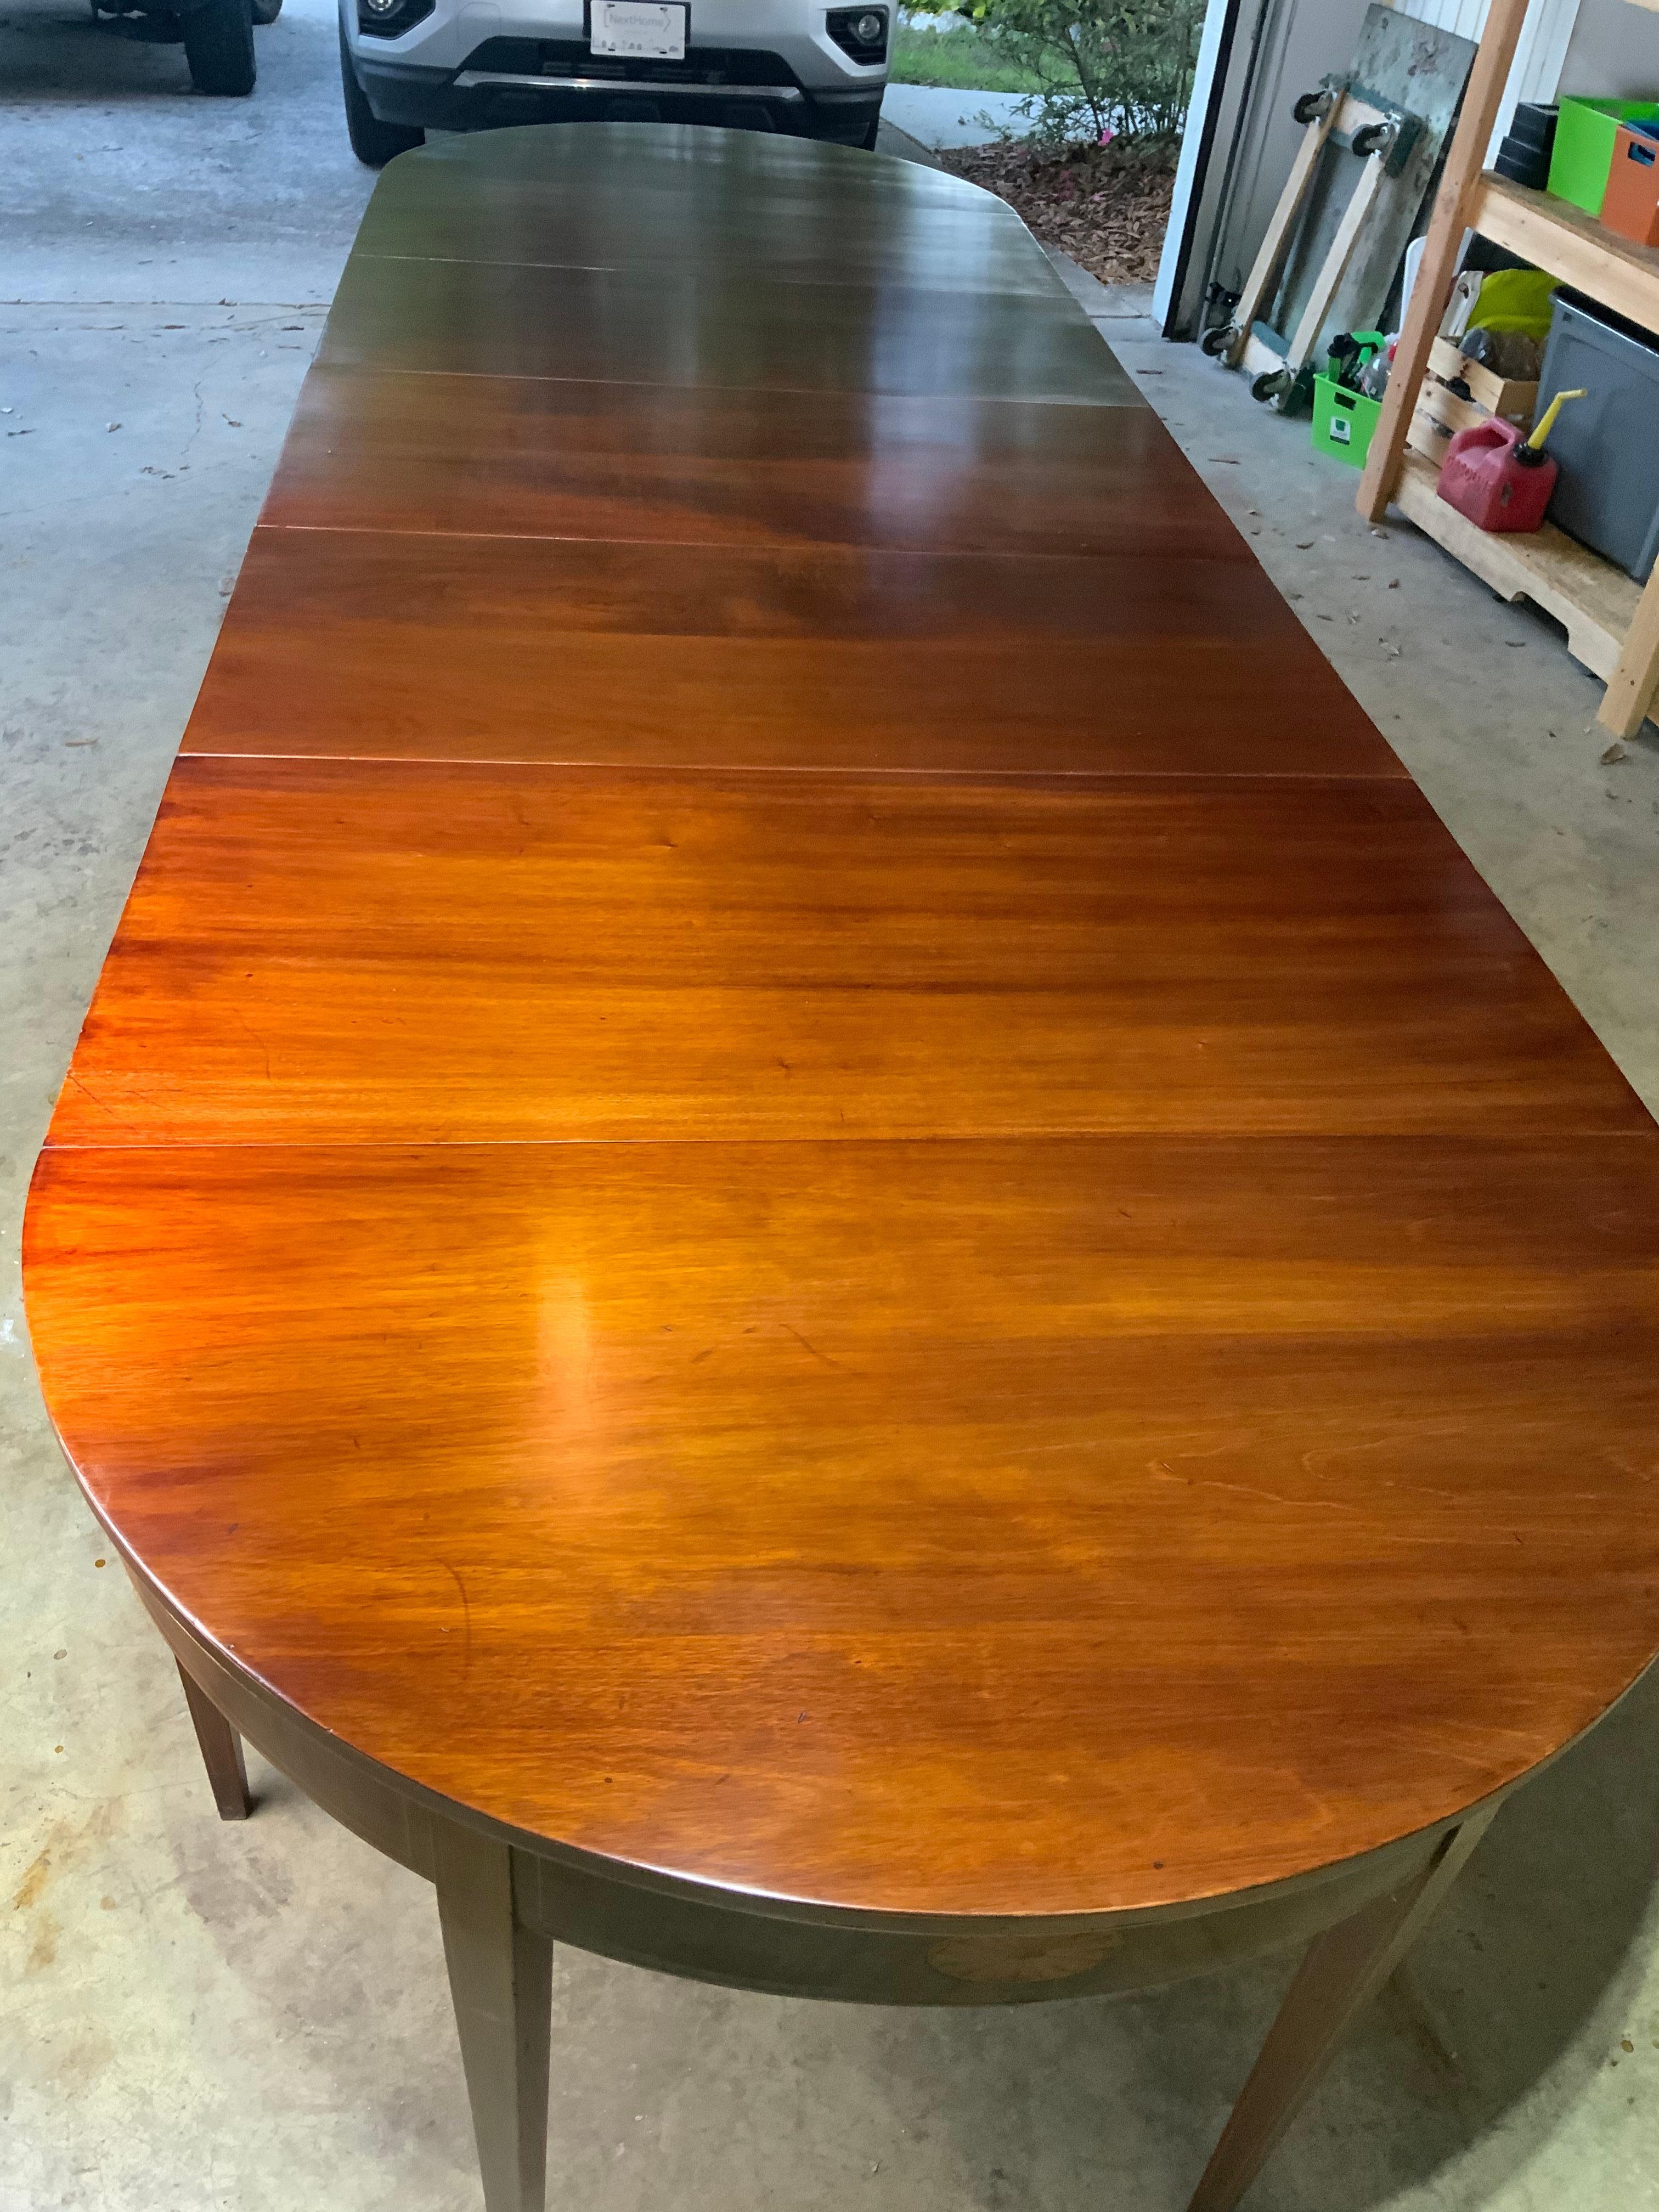 A very nice 12’5” large three section Georgian Hepplewhite style inlay Mahogany banquet dining table. This table is completely all original and was specifically built to always be a large dining table with the two demilune ends having drop leaves